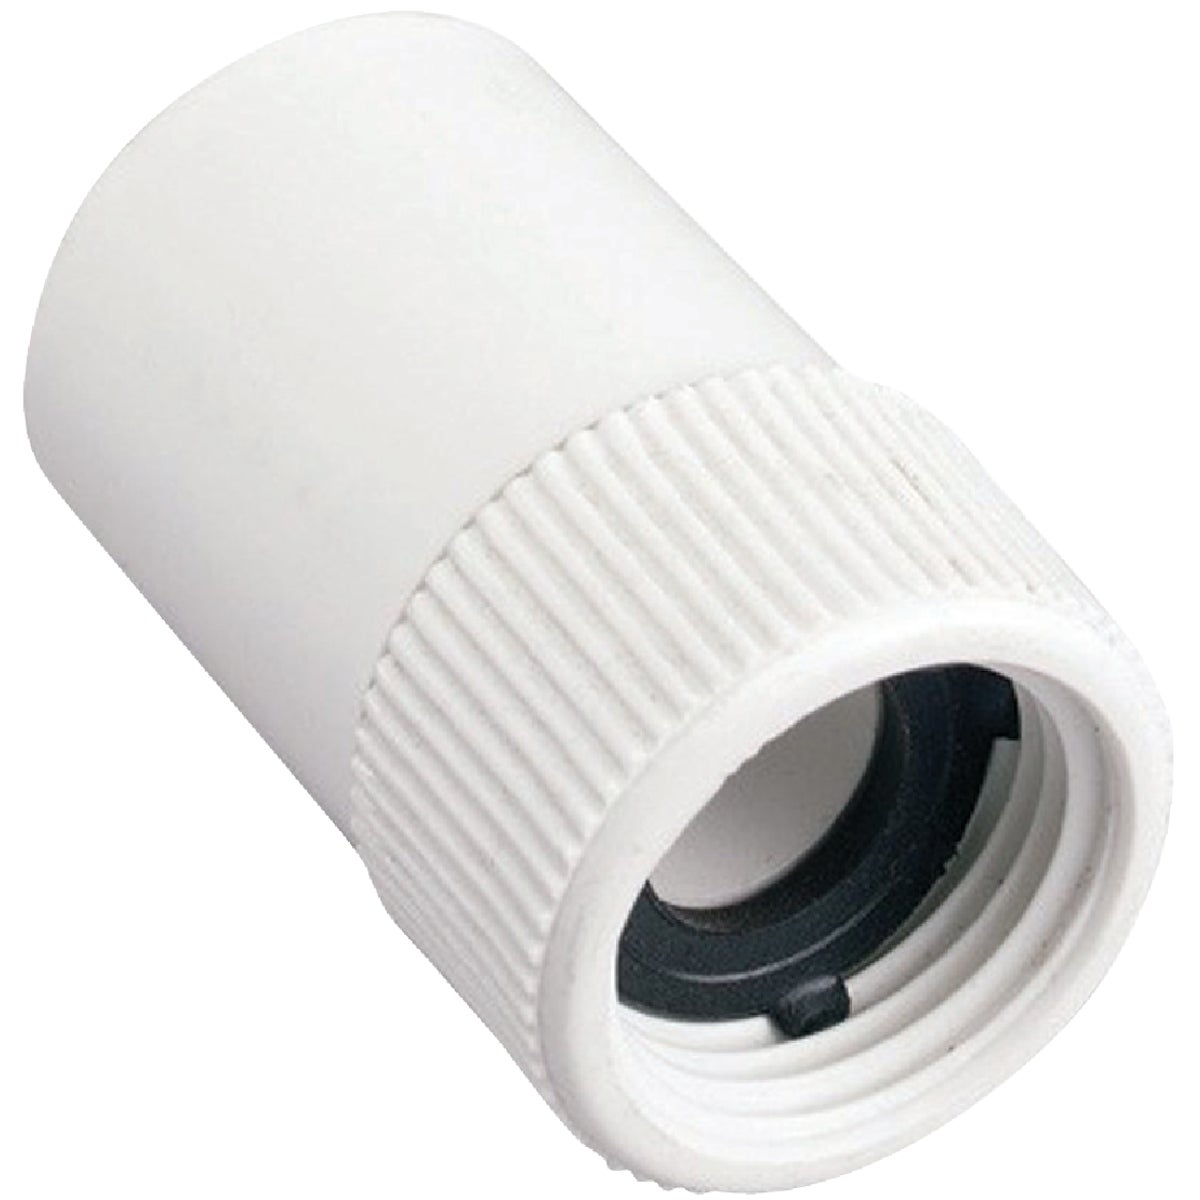 Item 729390, PVC (polyvinyl chloride) hose to pipe fitting.